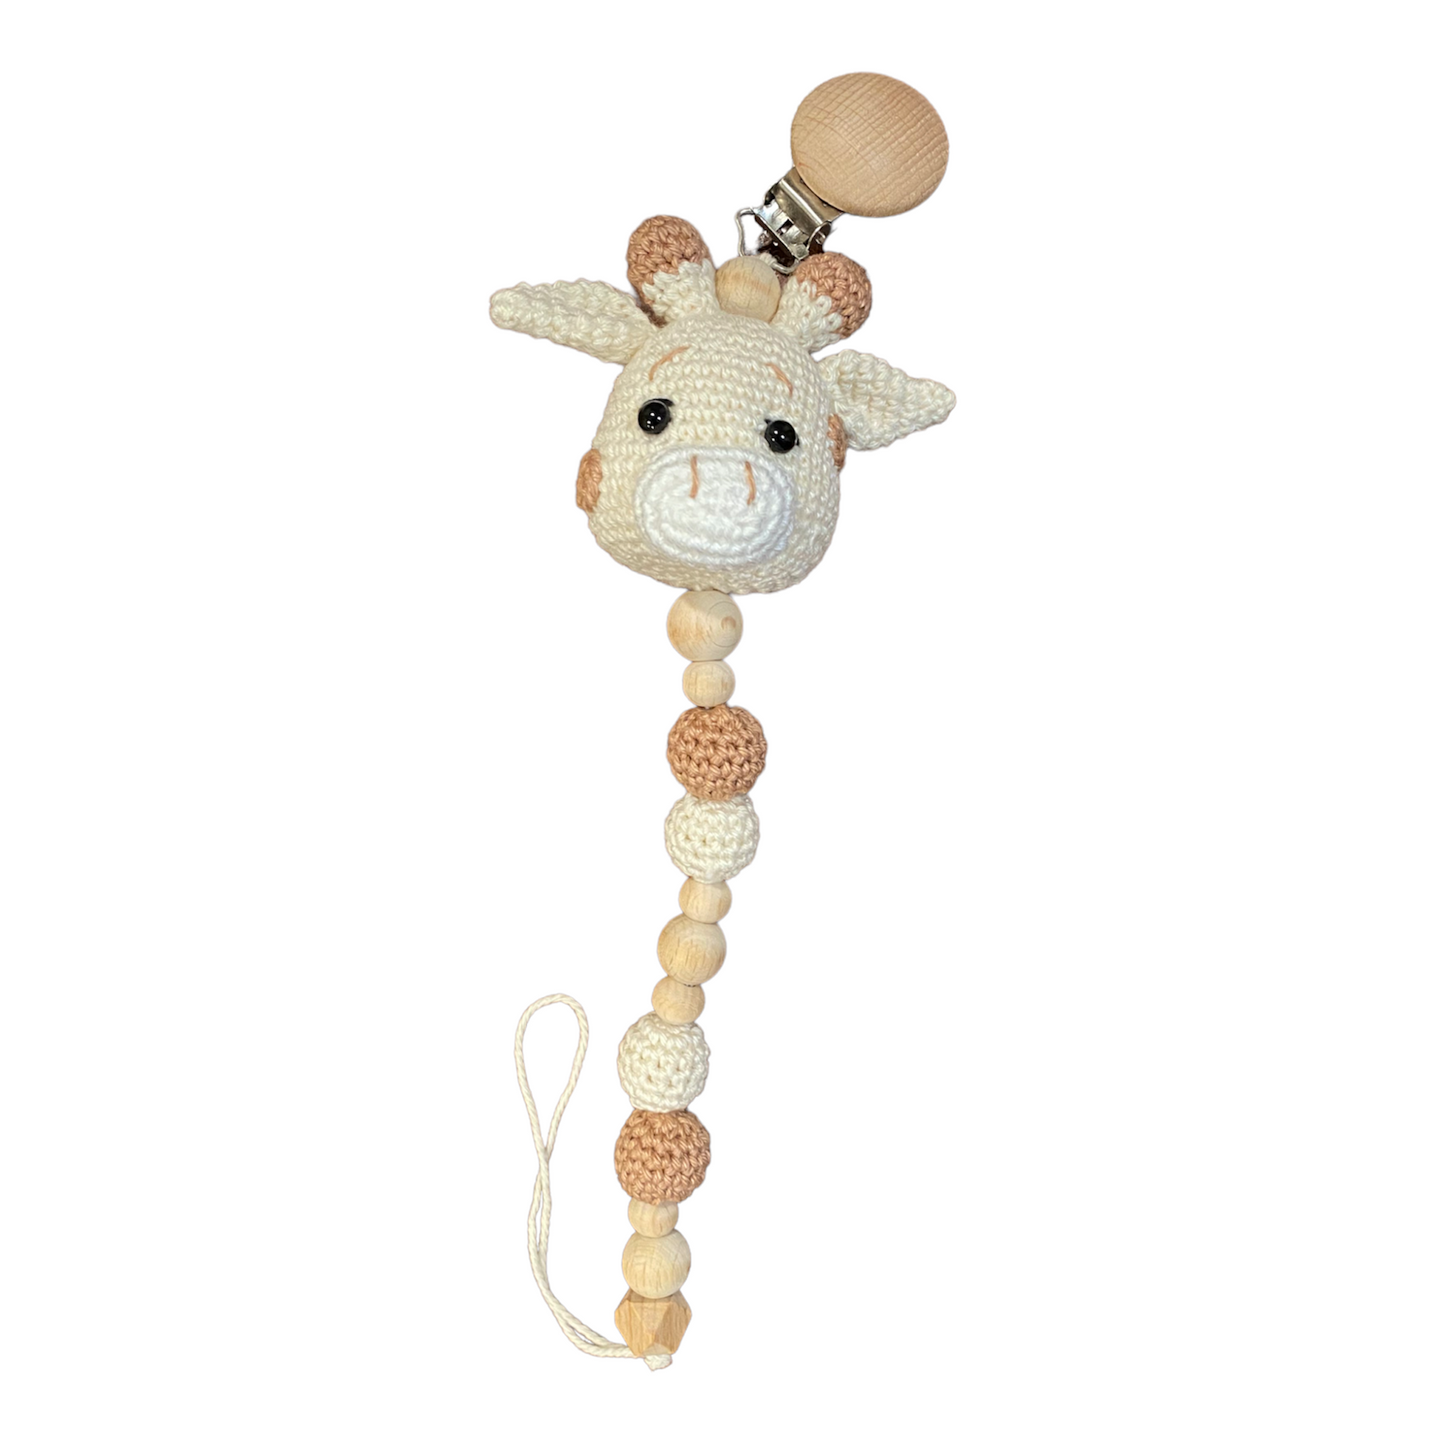 Handmade 100% Organic Cotton Crotchet Pacifier Clip / Holder - Different Animal Designs Available, Eco-Friendly Product, Plastic-Free